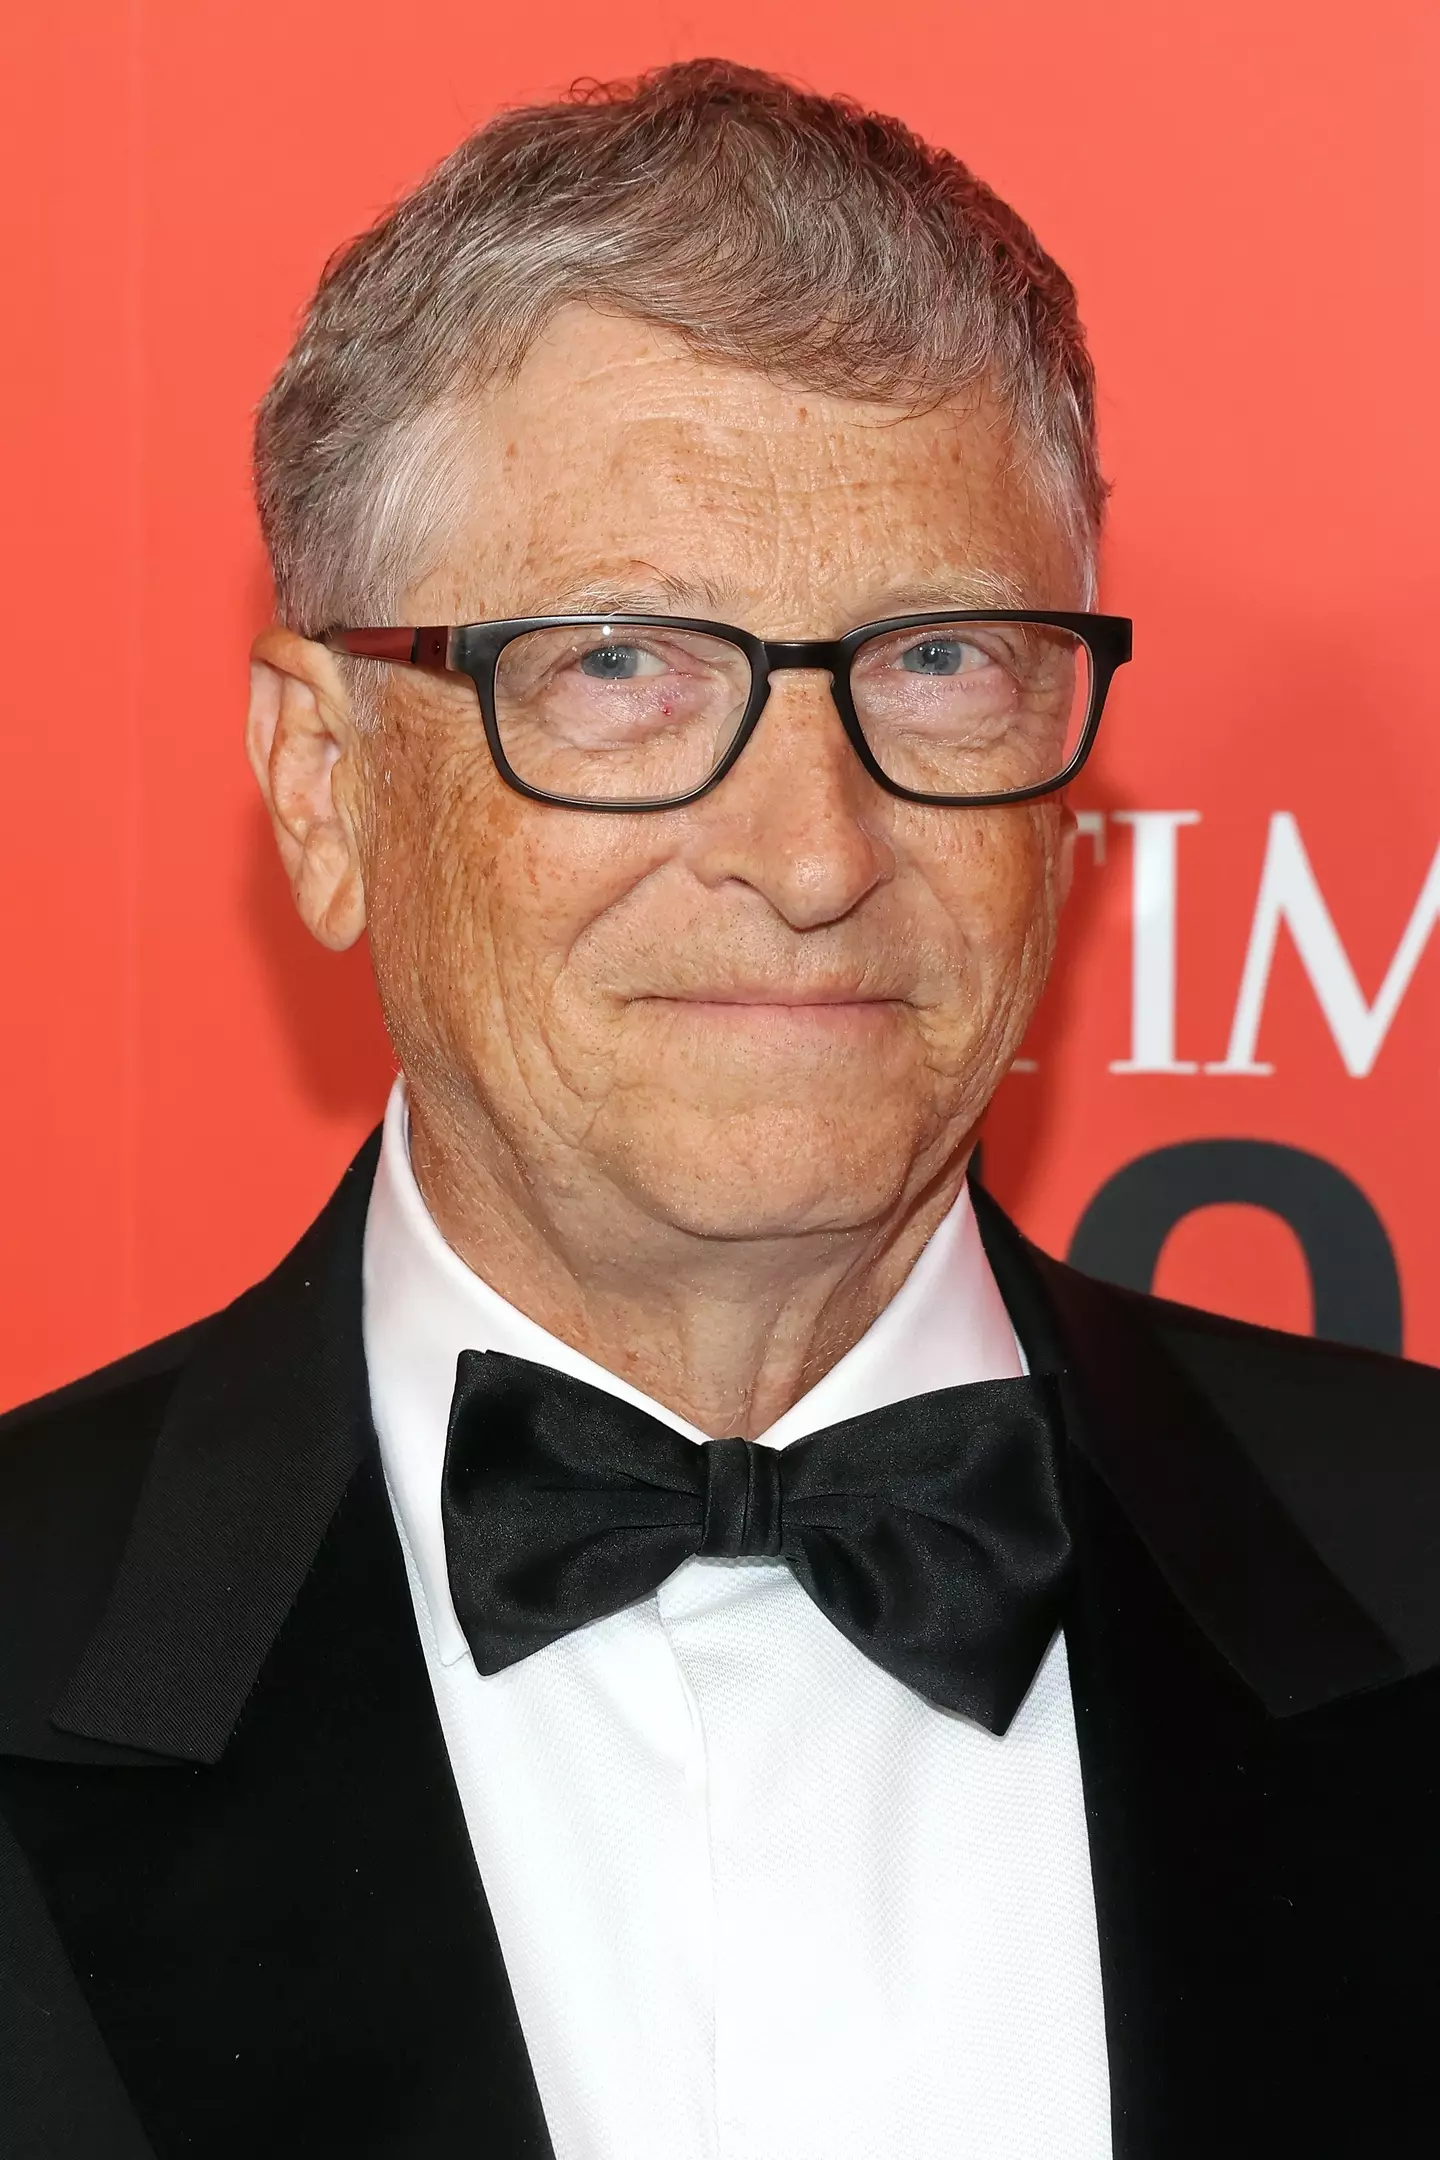 Bill Gates is not leaving all of his money to his kids.